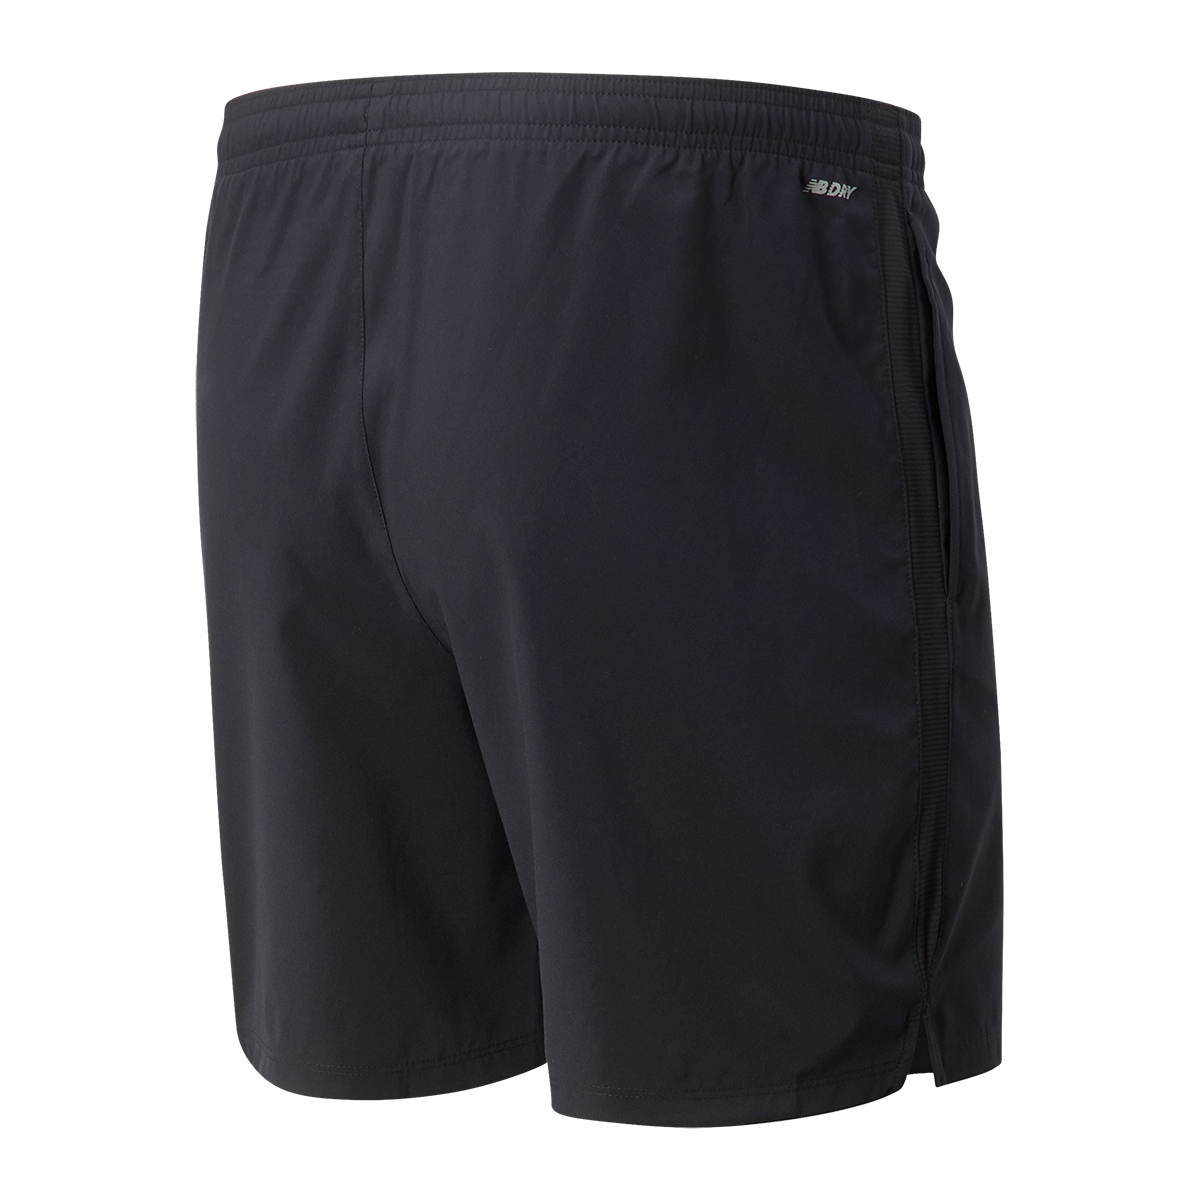 New Balance Accelerate 7" Short, , large image number null